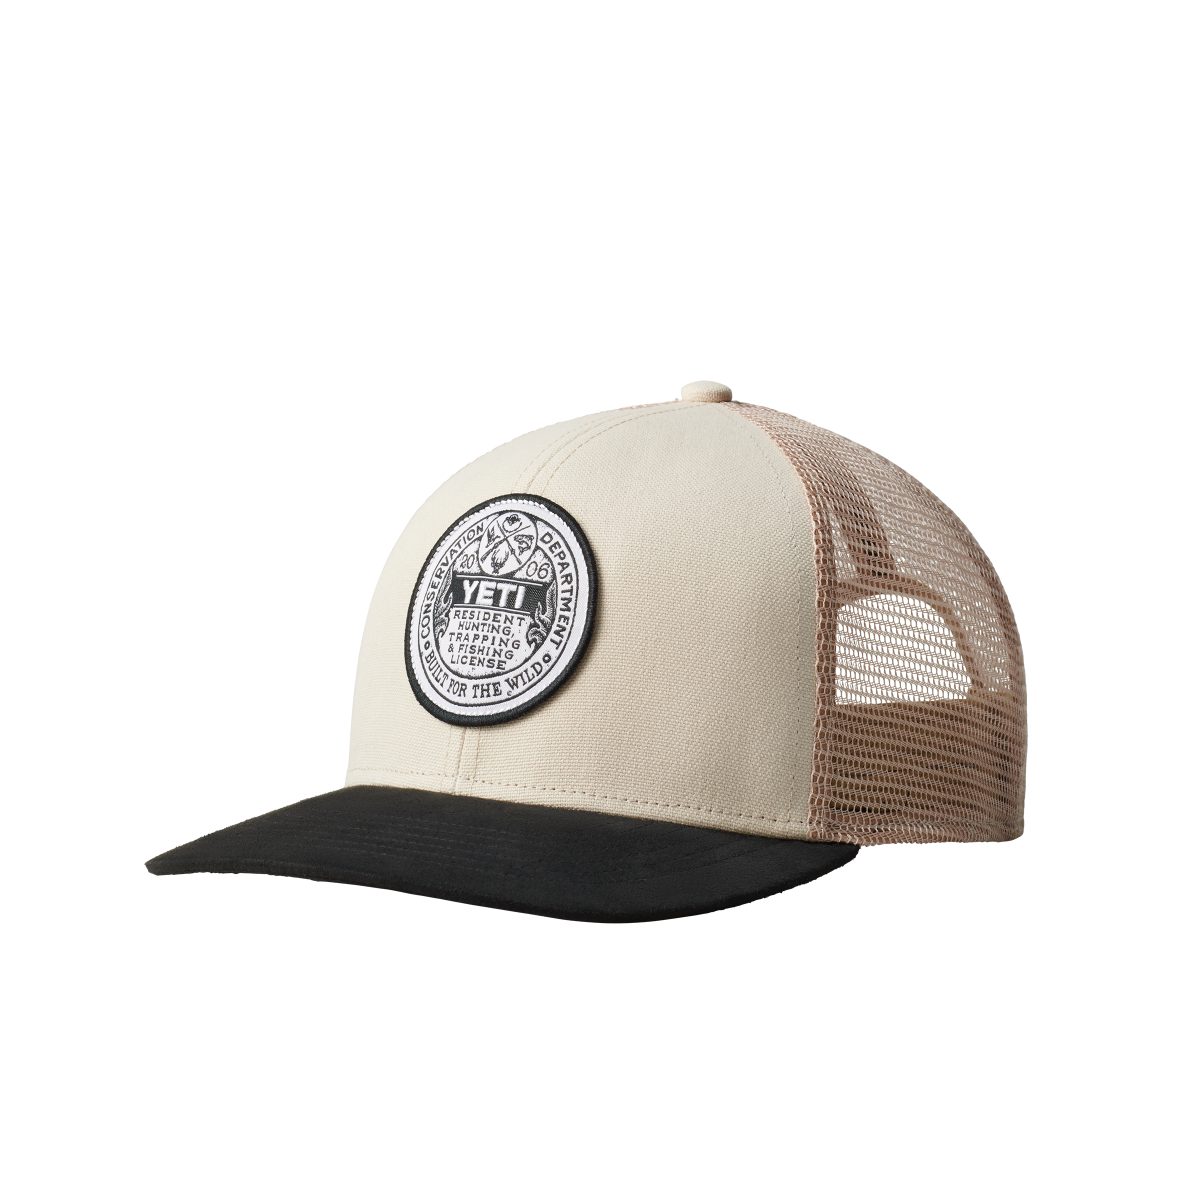 210173 Fall Apparel DealerImages YETI F21 Hats Trapping License Mid Pro Trucker Hat Sharptail Taupe Black Front 3Qtr 0533 Layers F 2400x2400 1